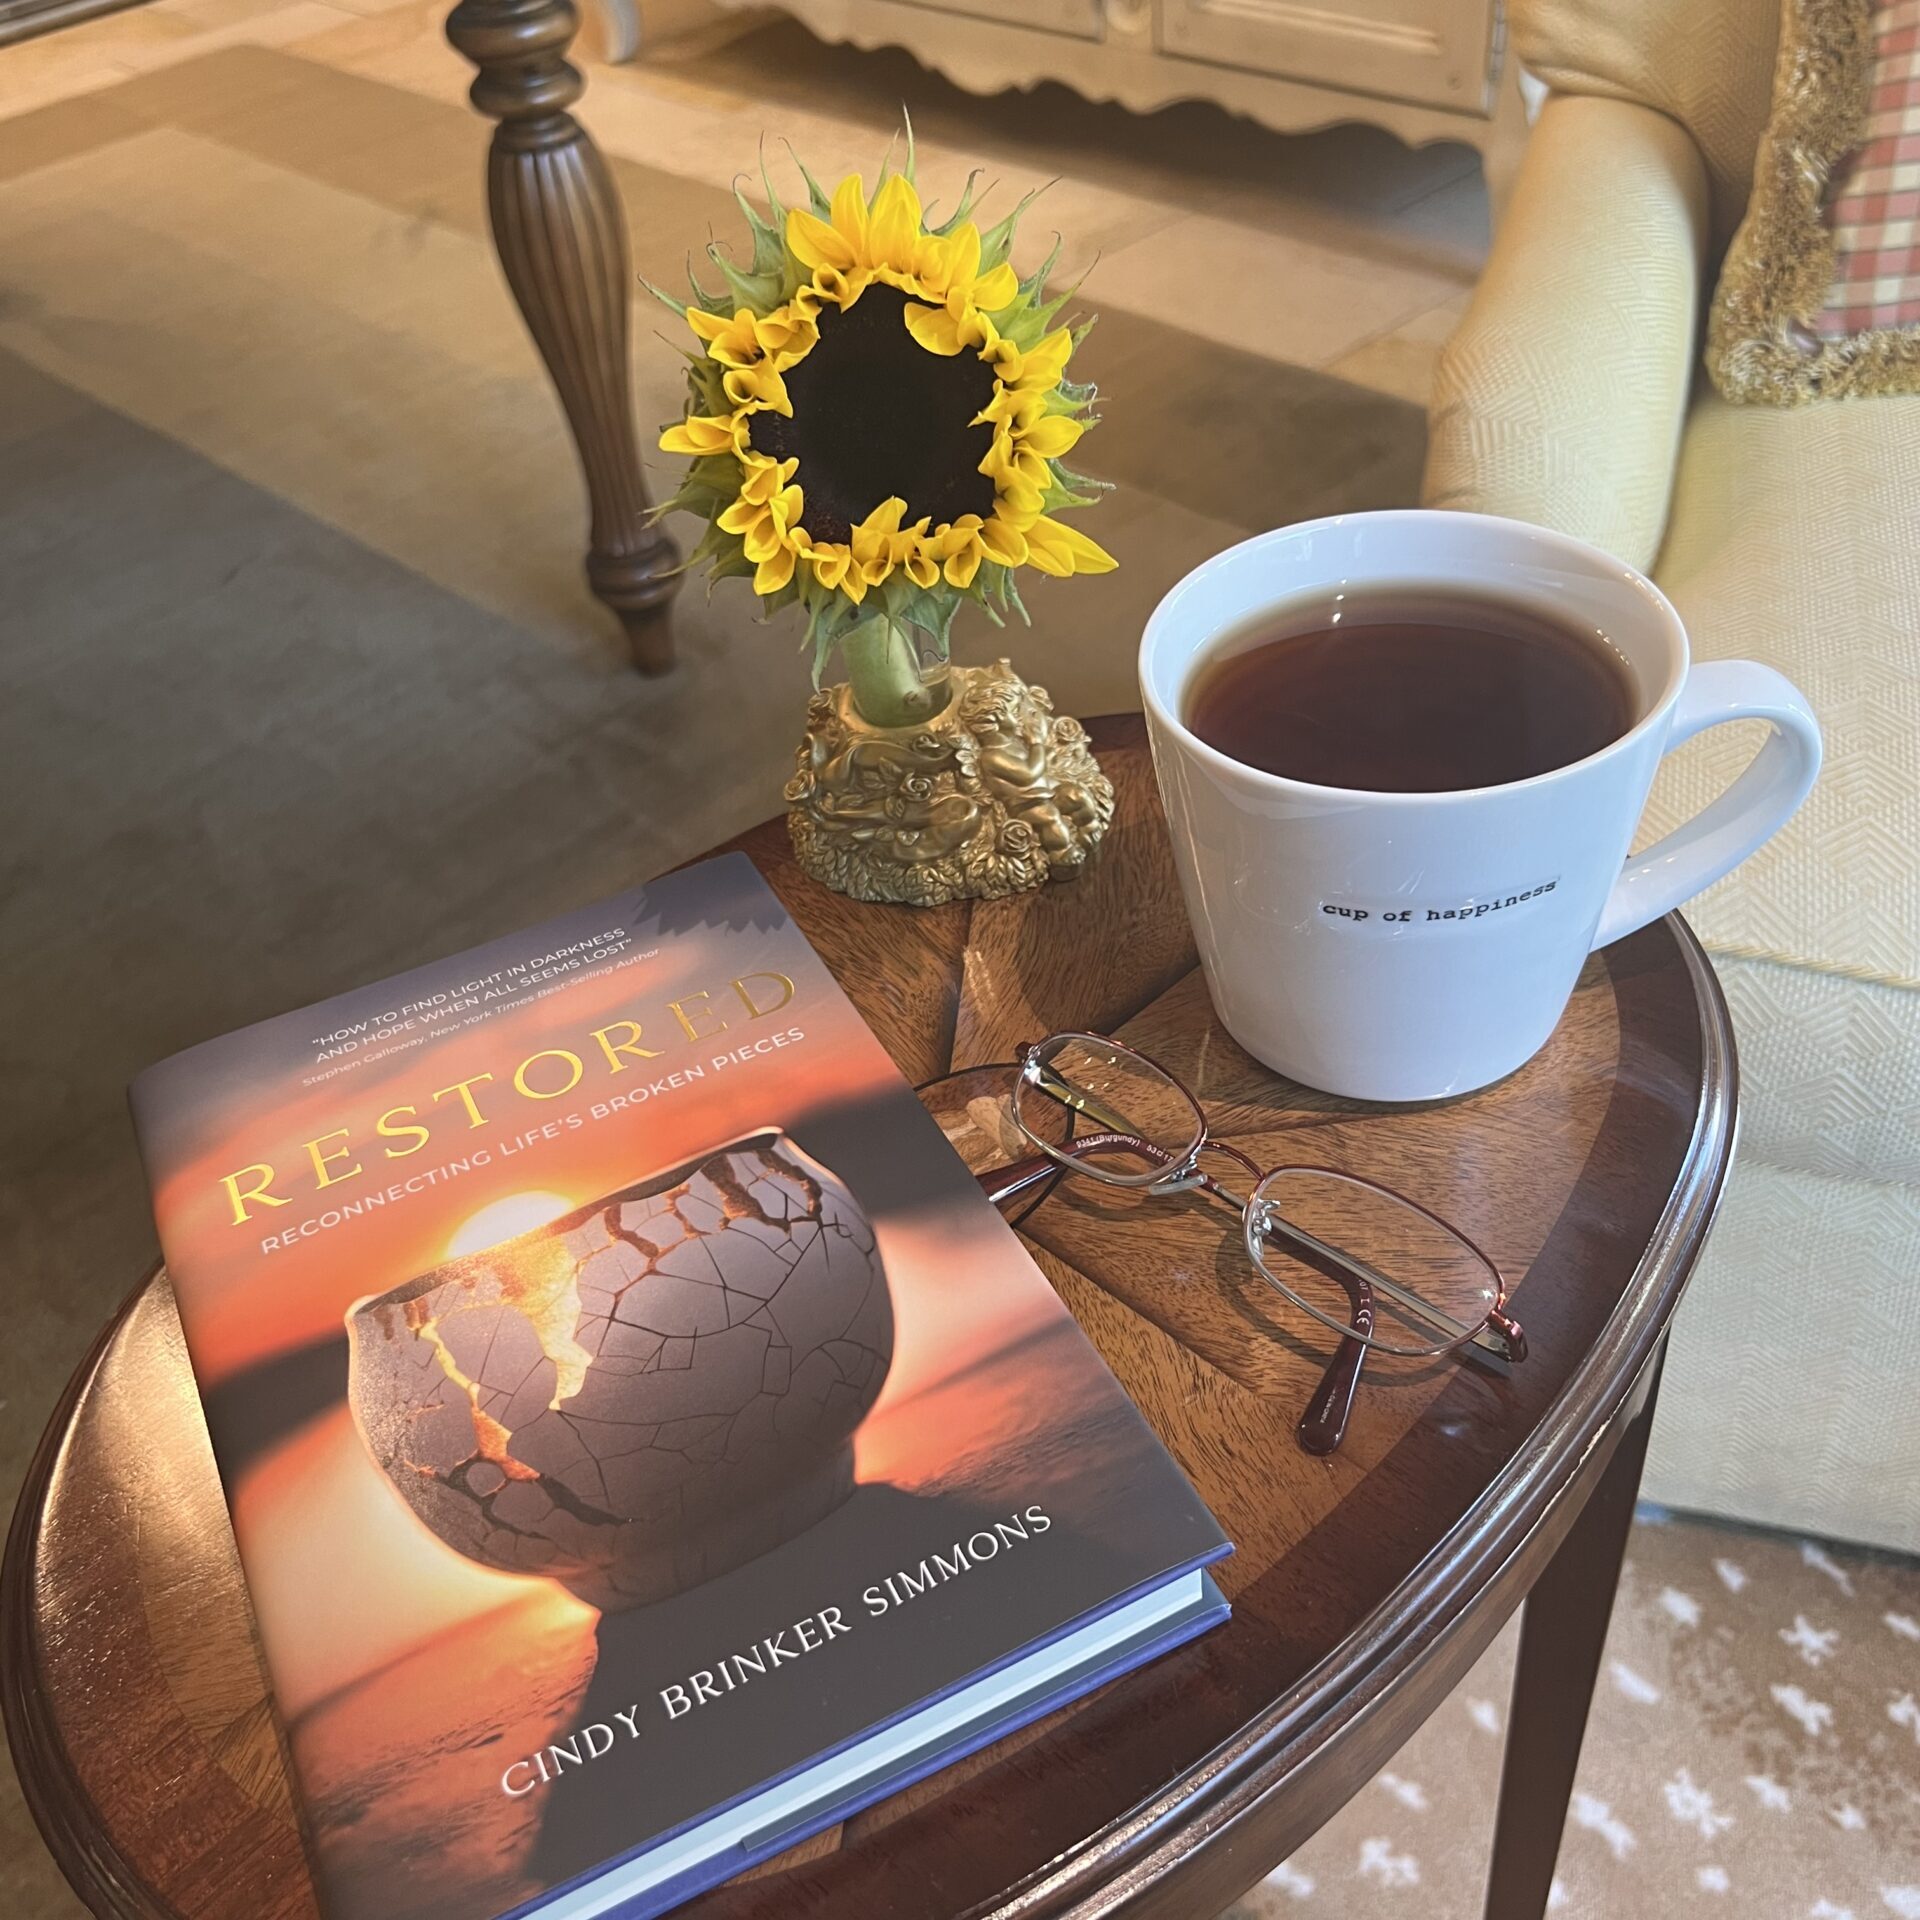 Restored - Reconnecting Life's Broken Pieces by Cindy Brinker Simmons